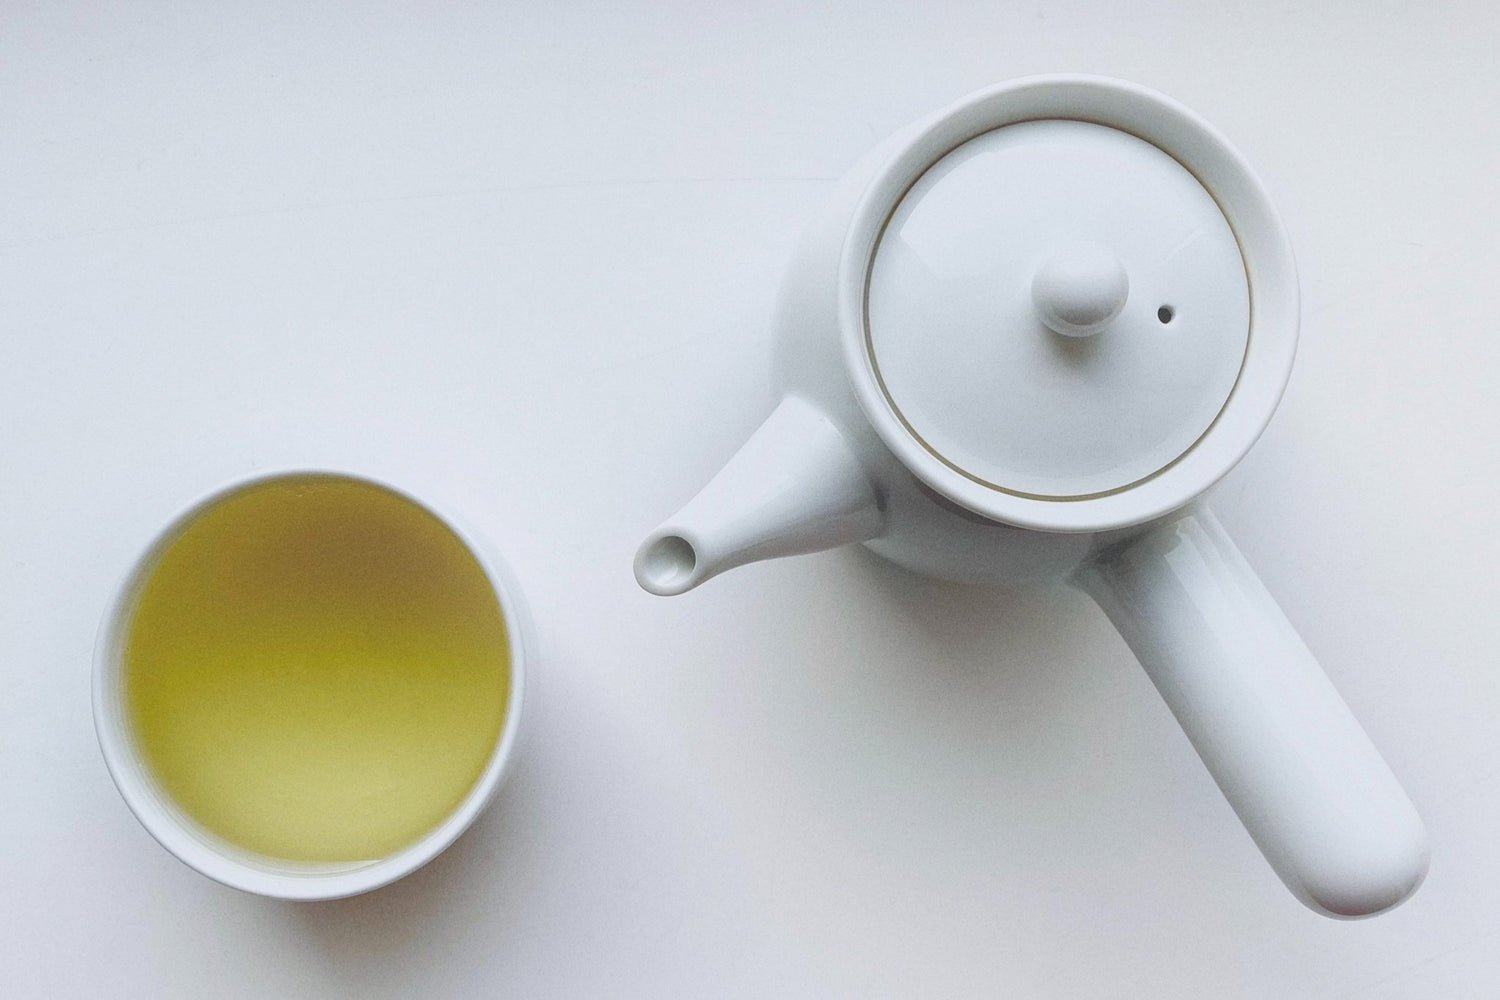 5 Unexpected Reasons Why White Tea Should Be Your Daily Go-To (Caffeine Included!) - Loose Leaf Tea Market